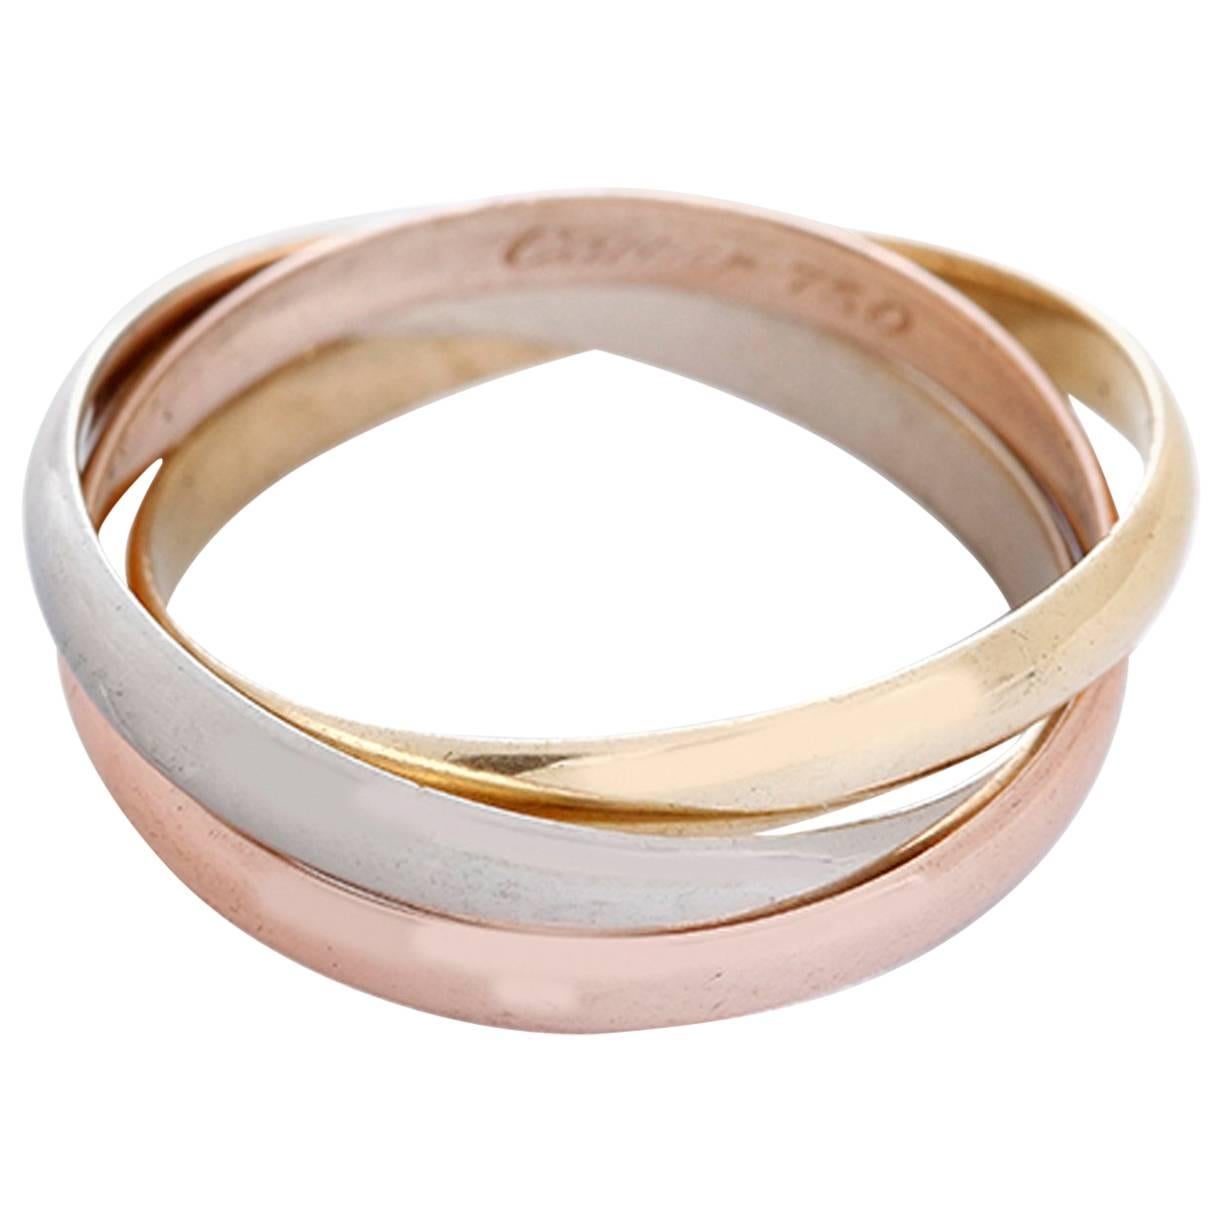 Cartier Trinity Gold Tri-Color Ring Sz. 51 (US 5-3/4)